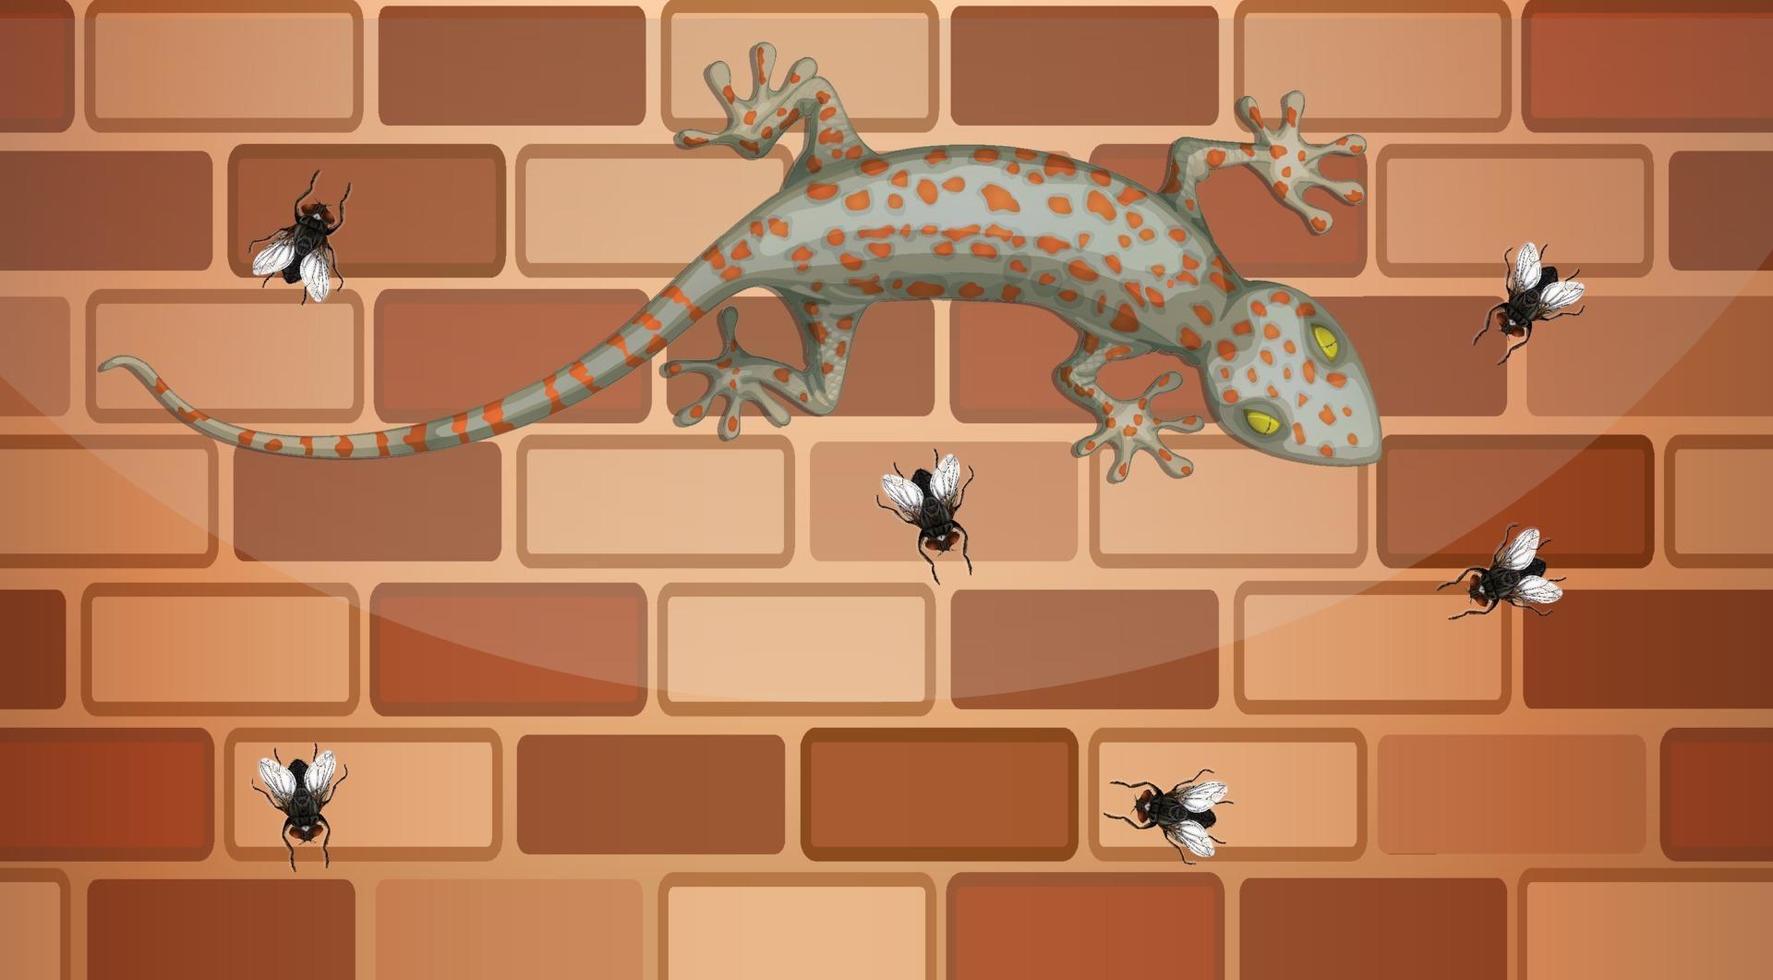 Gecko on brick wall with many fly in cartoon style vector